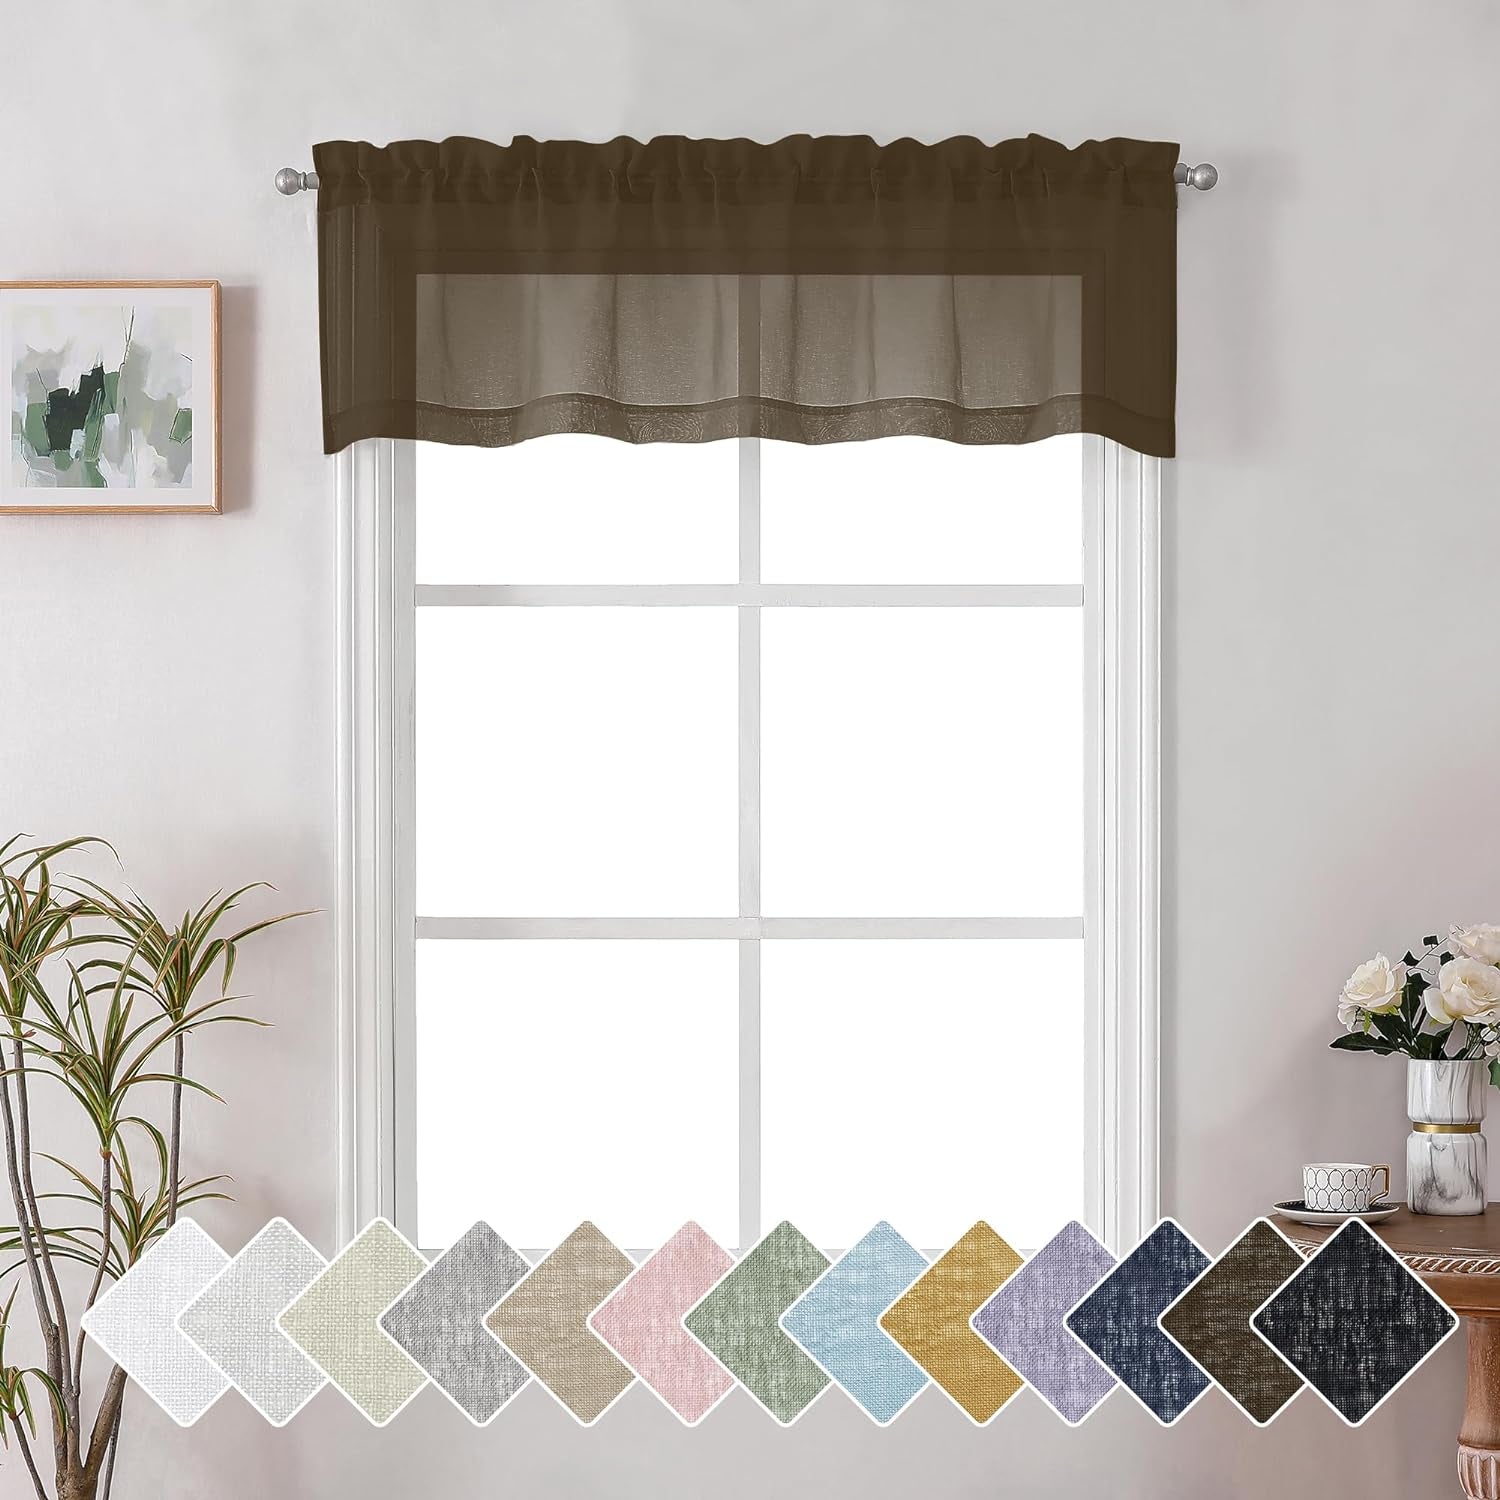 Lecloud Doris Faux Linen Sheer Grey Valance Curtains 14 Inches Length, Cafe Kitchen Bedroom Living Room Gauzy Silver Grey Curtain for Small Window, Slub Light Gray Valance Dual Rod Pockets 60X14 Inch  Lecloud Chocolate Brown 60 W X 14 L 